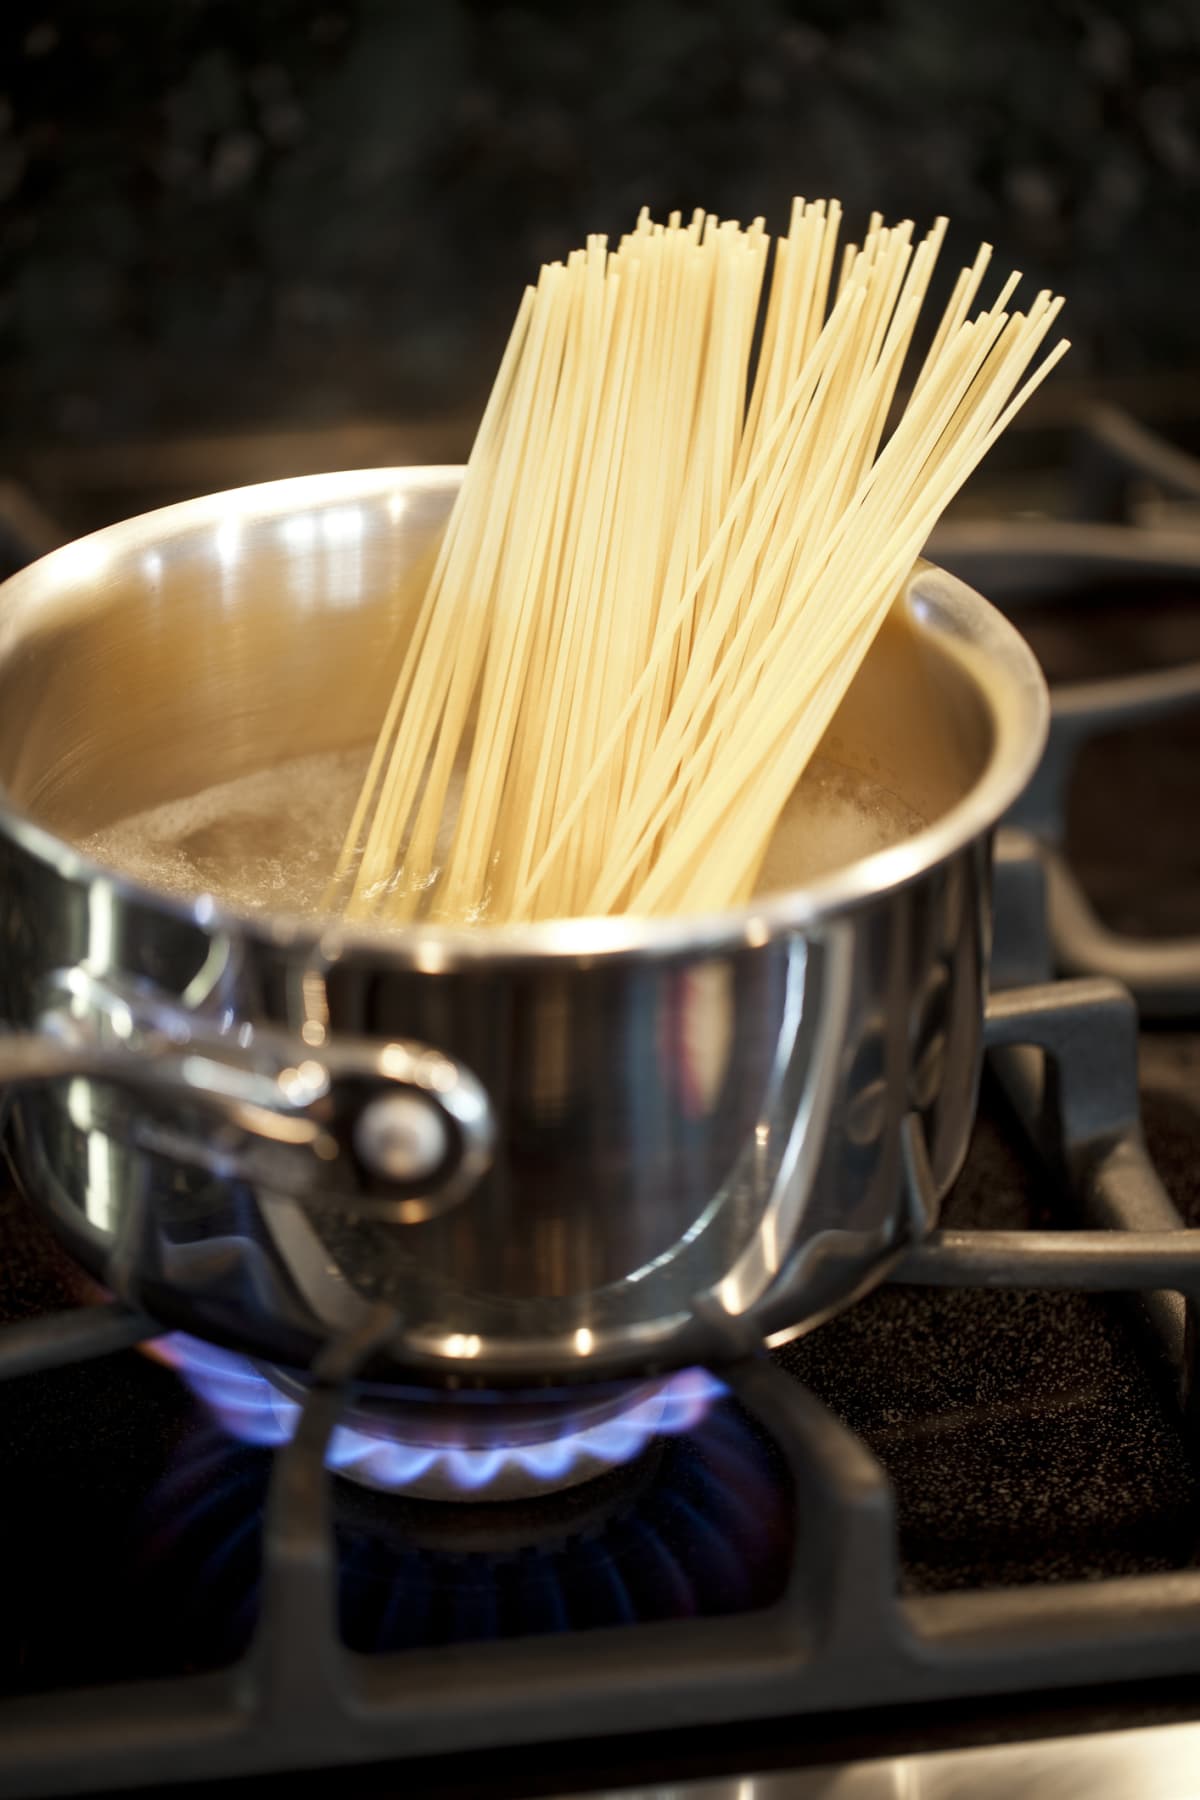 Spaghetti being cooked in a pot of boiling water and Bolognese Sauce